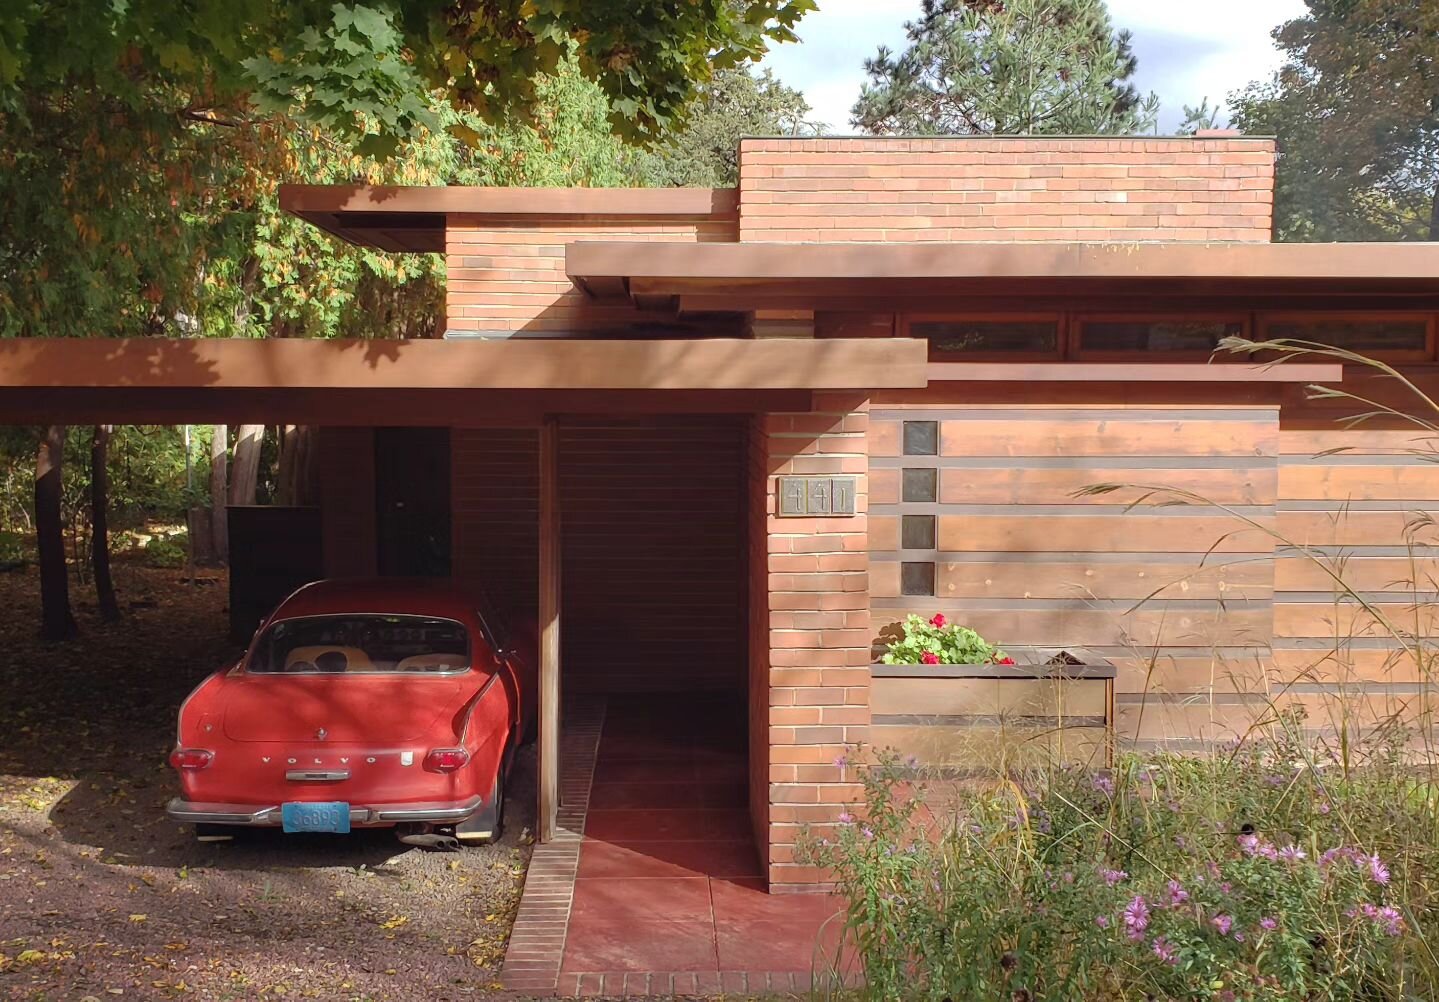 Jacobs I, Frank Lloyd Wright Architect, pioneering residential design in Wisconsin, always a classic...

#flw #midcenturymodern #usonianarchitecture #usonian #franklloydwright #jacobshouse #midcentury